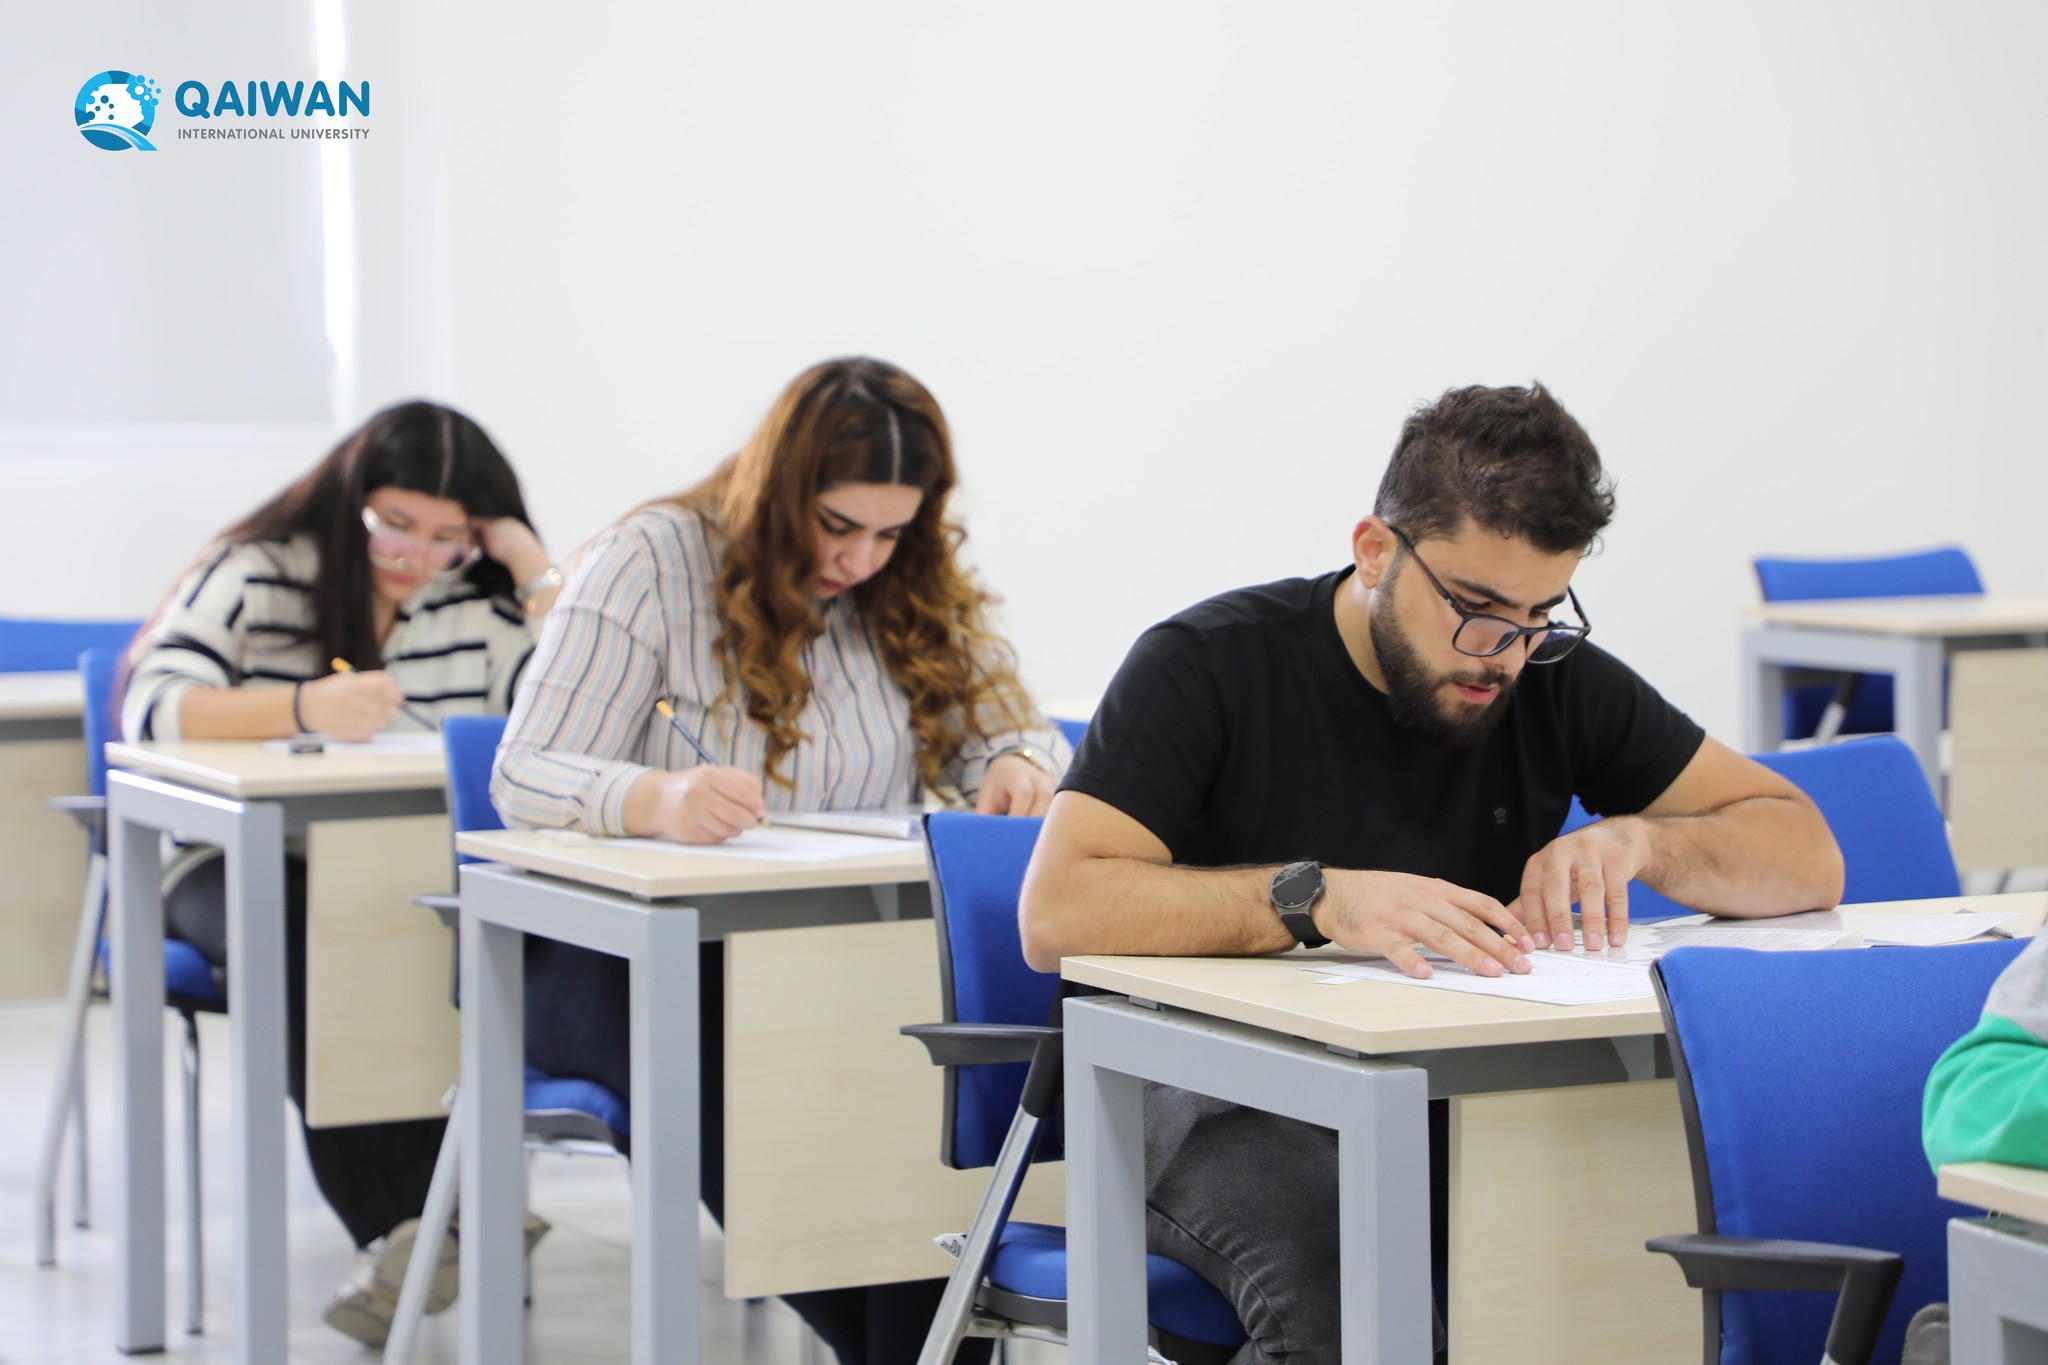 English Placement Test took place within the Pre Academic Program (PAP)